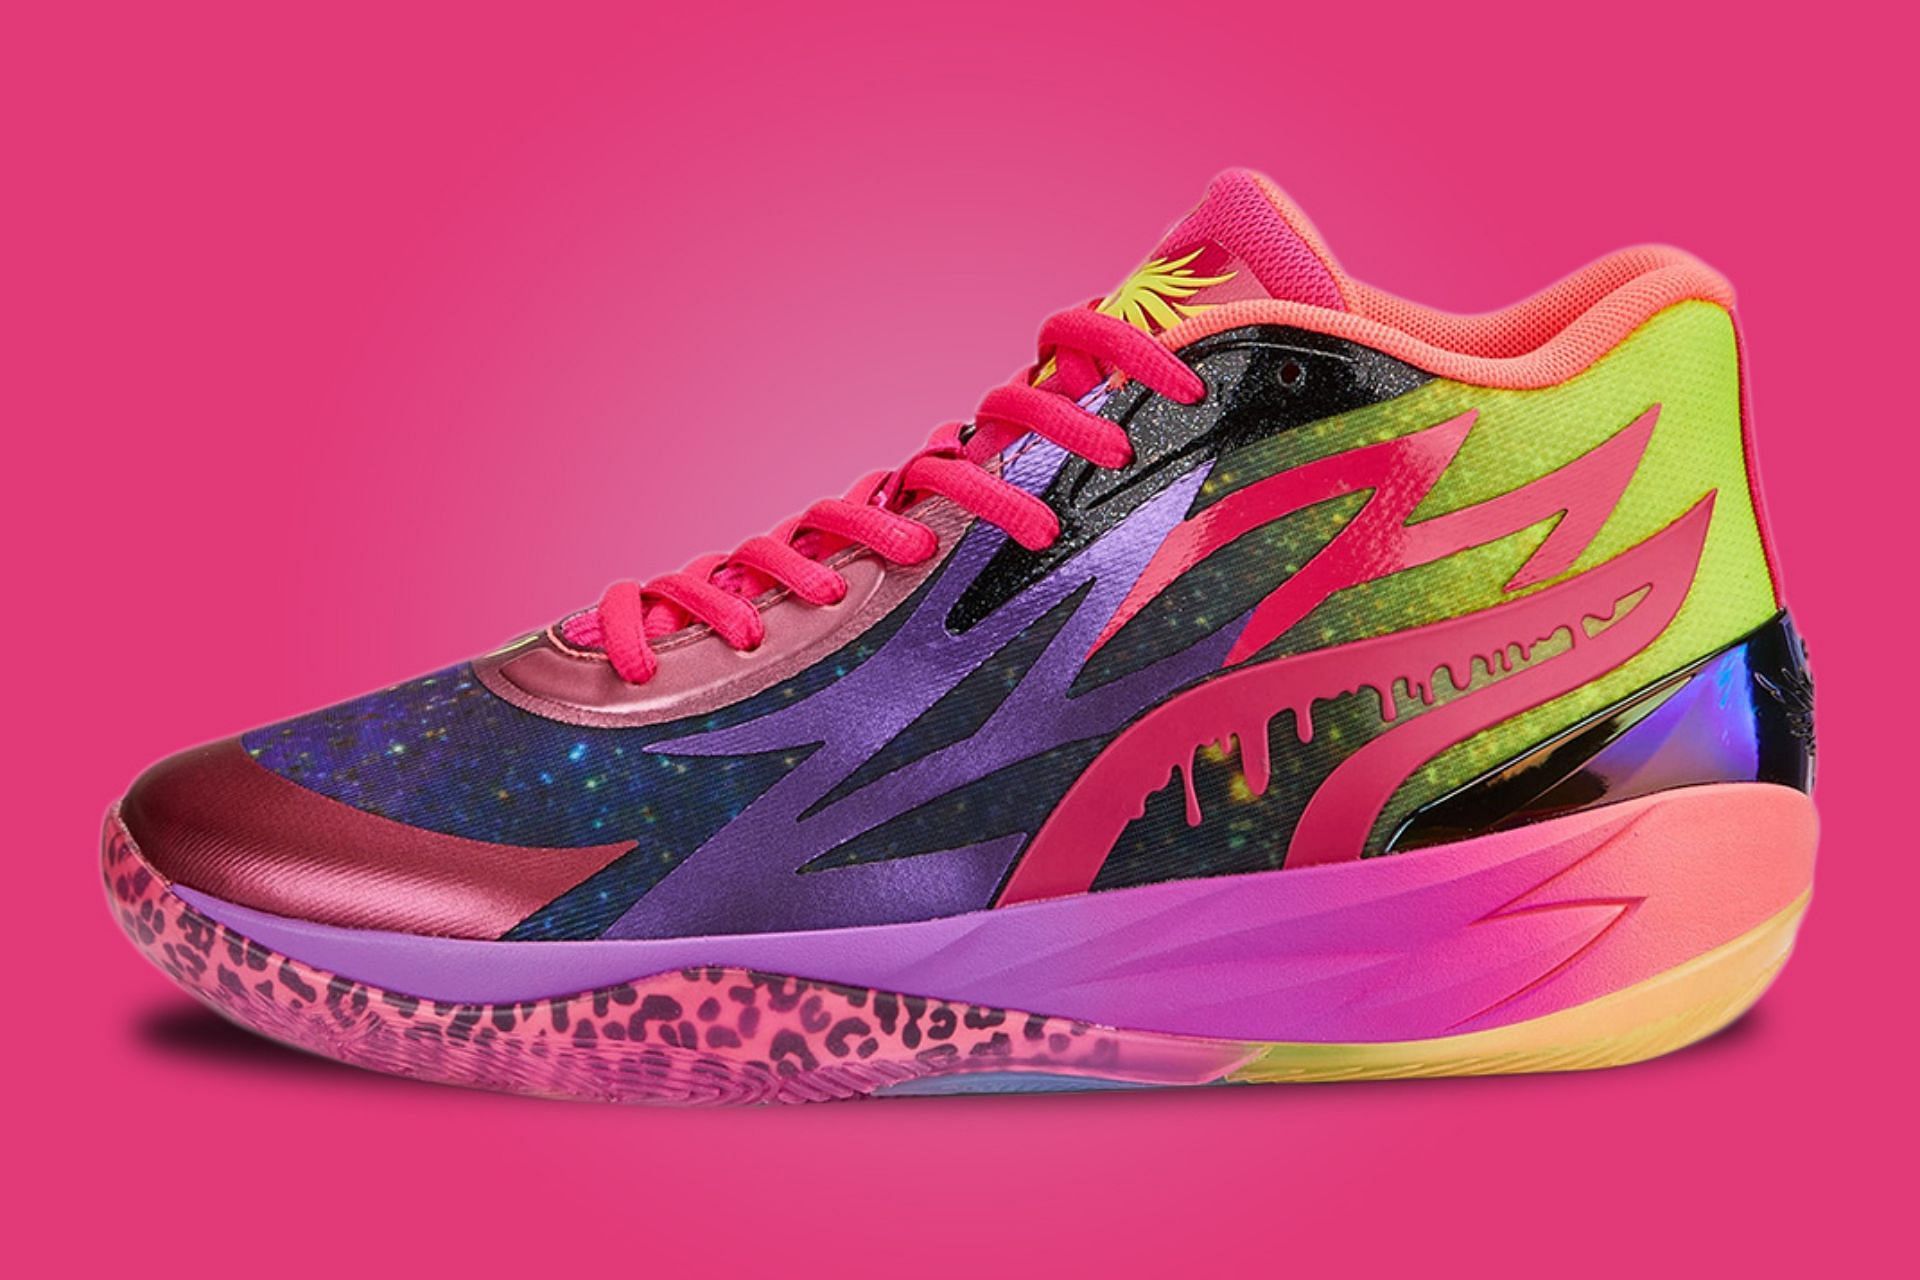 Puma: LaMelo Ball x Puma MB.02 “Galaxy” shoes: Where to buy, price, and  more details explored